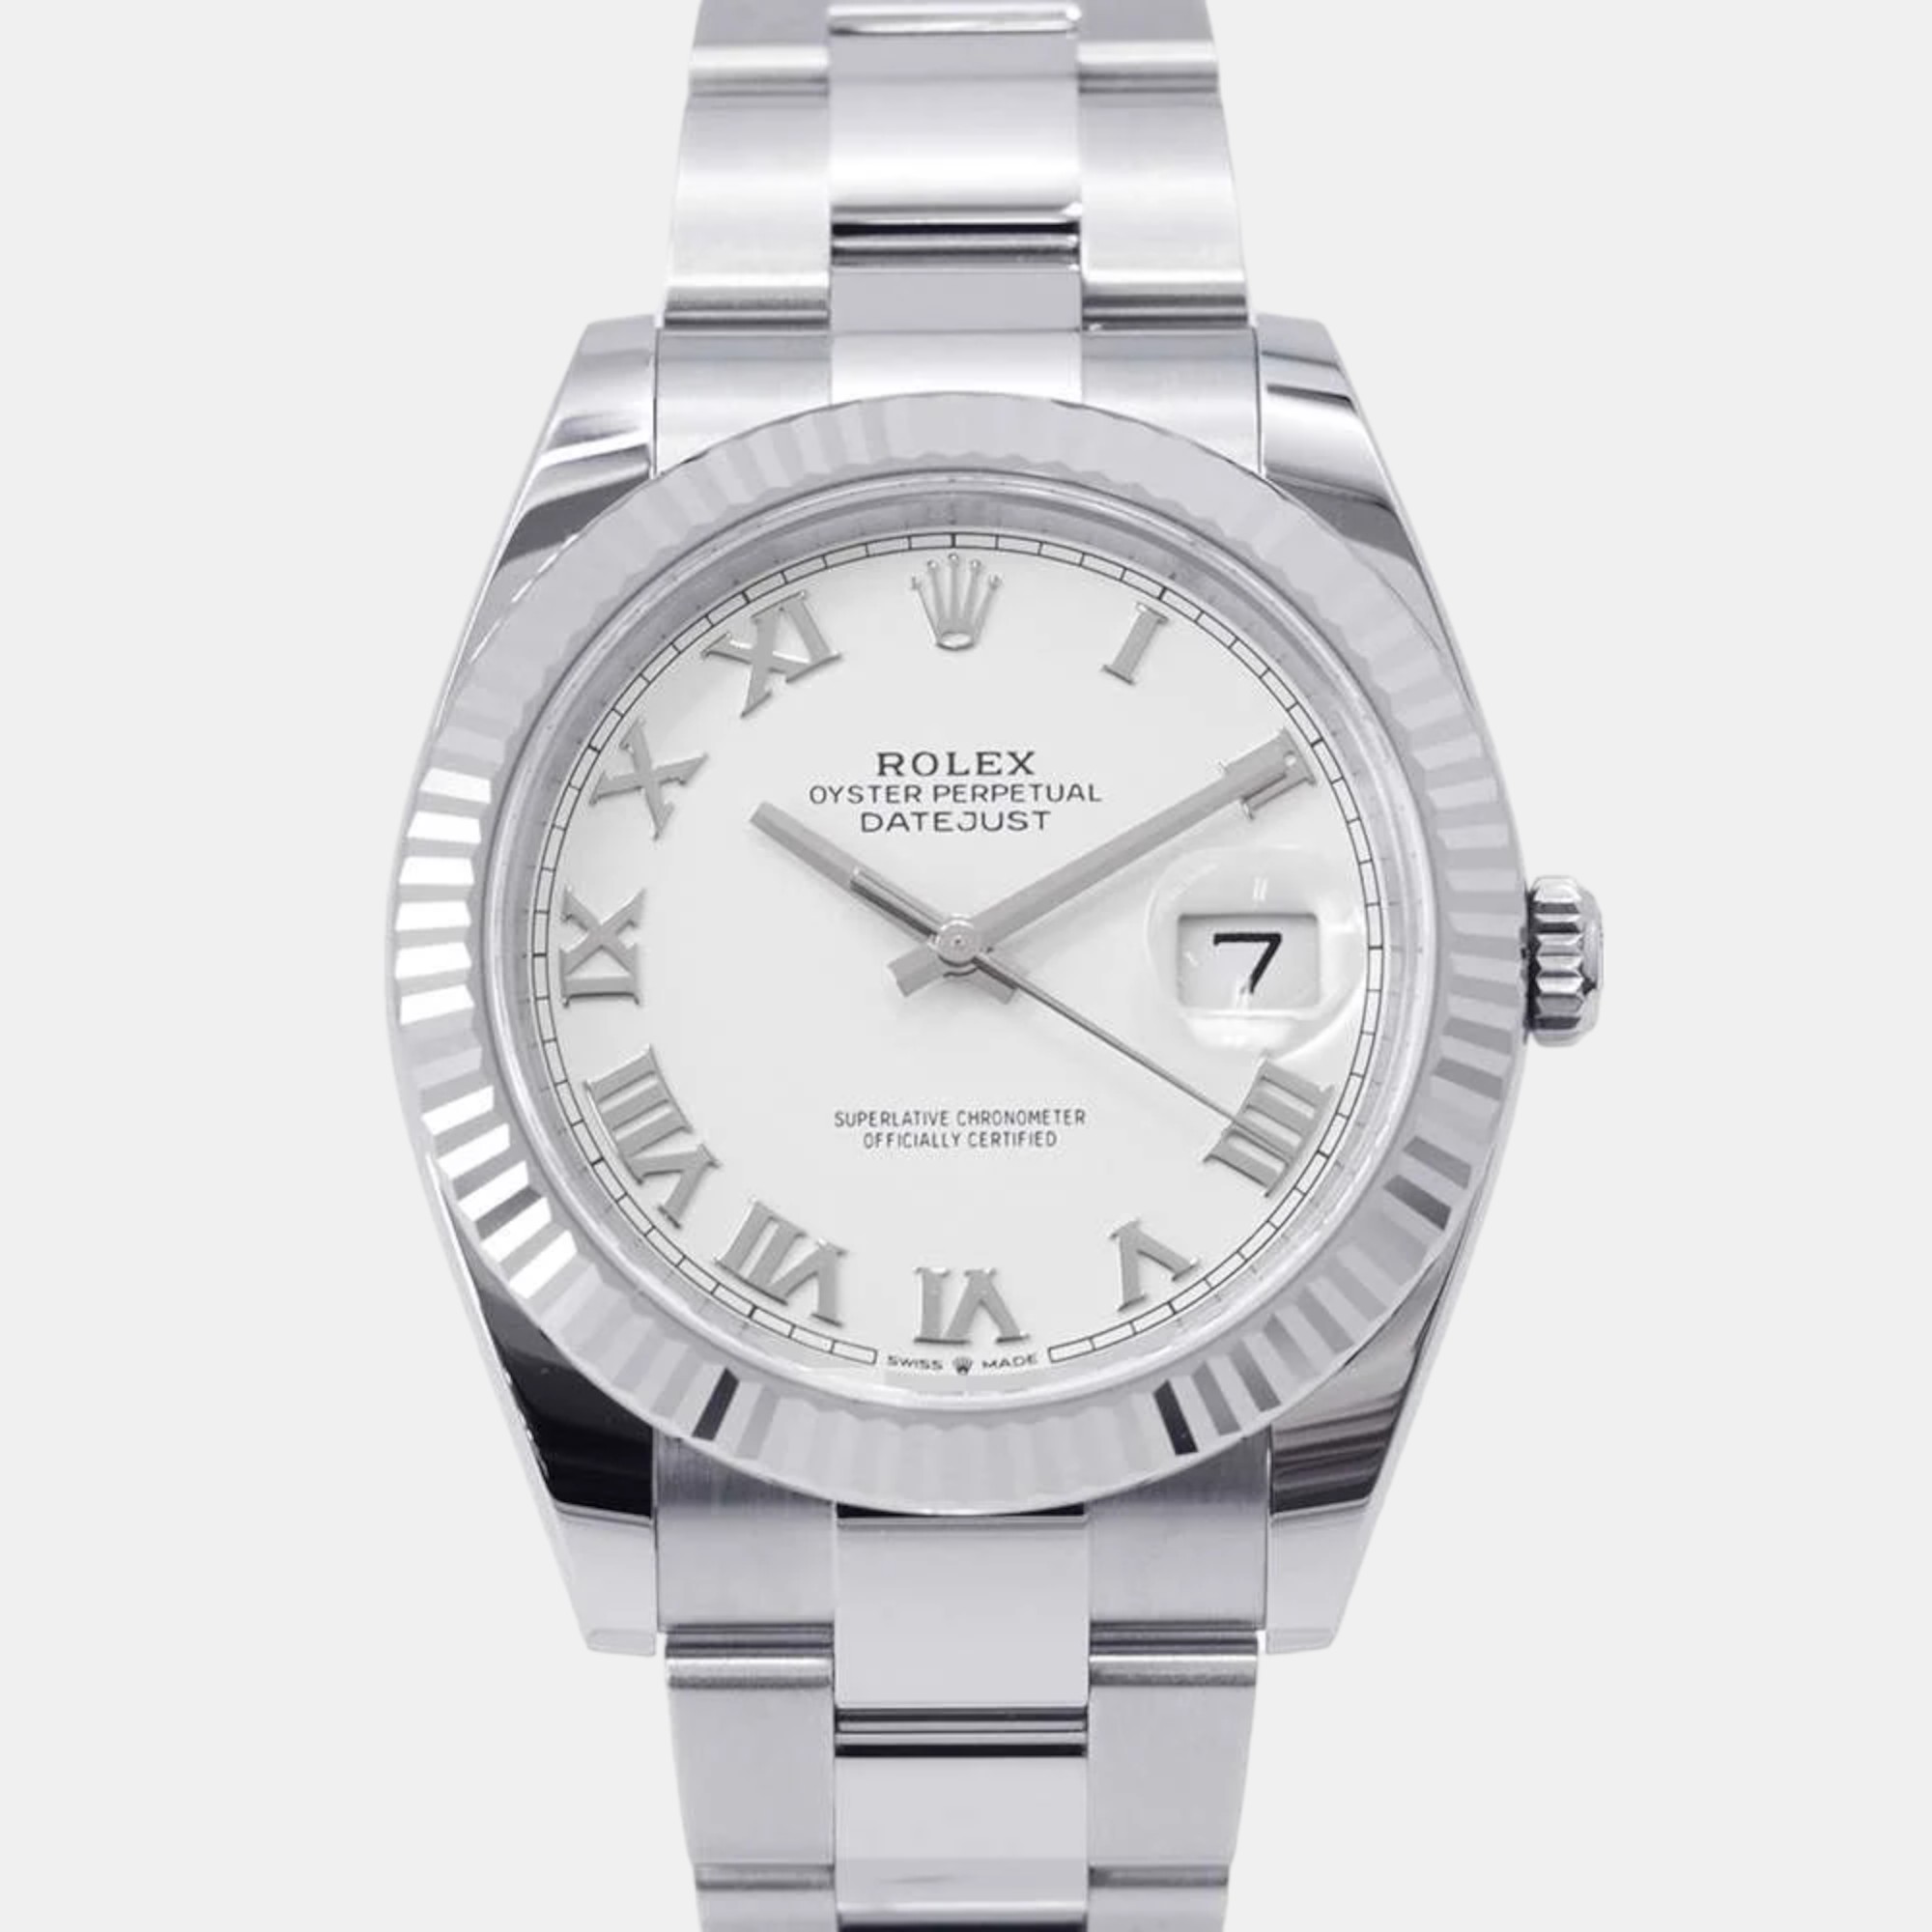 Rolex white 18k white gold stainless steel datejust 126334 automatic men's wristwatch 41 mm